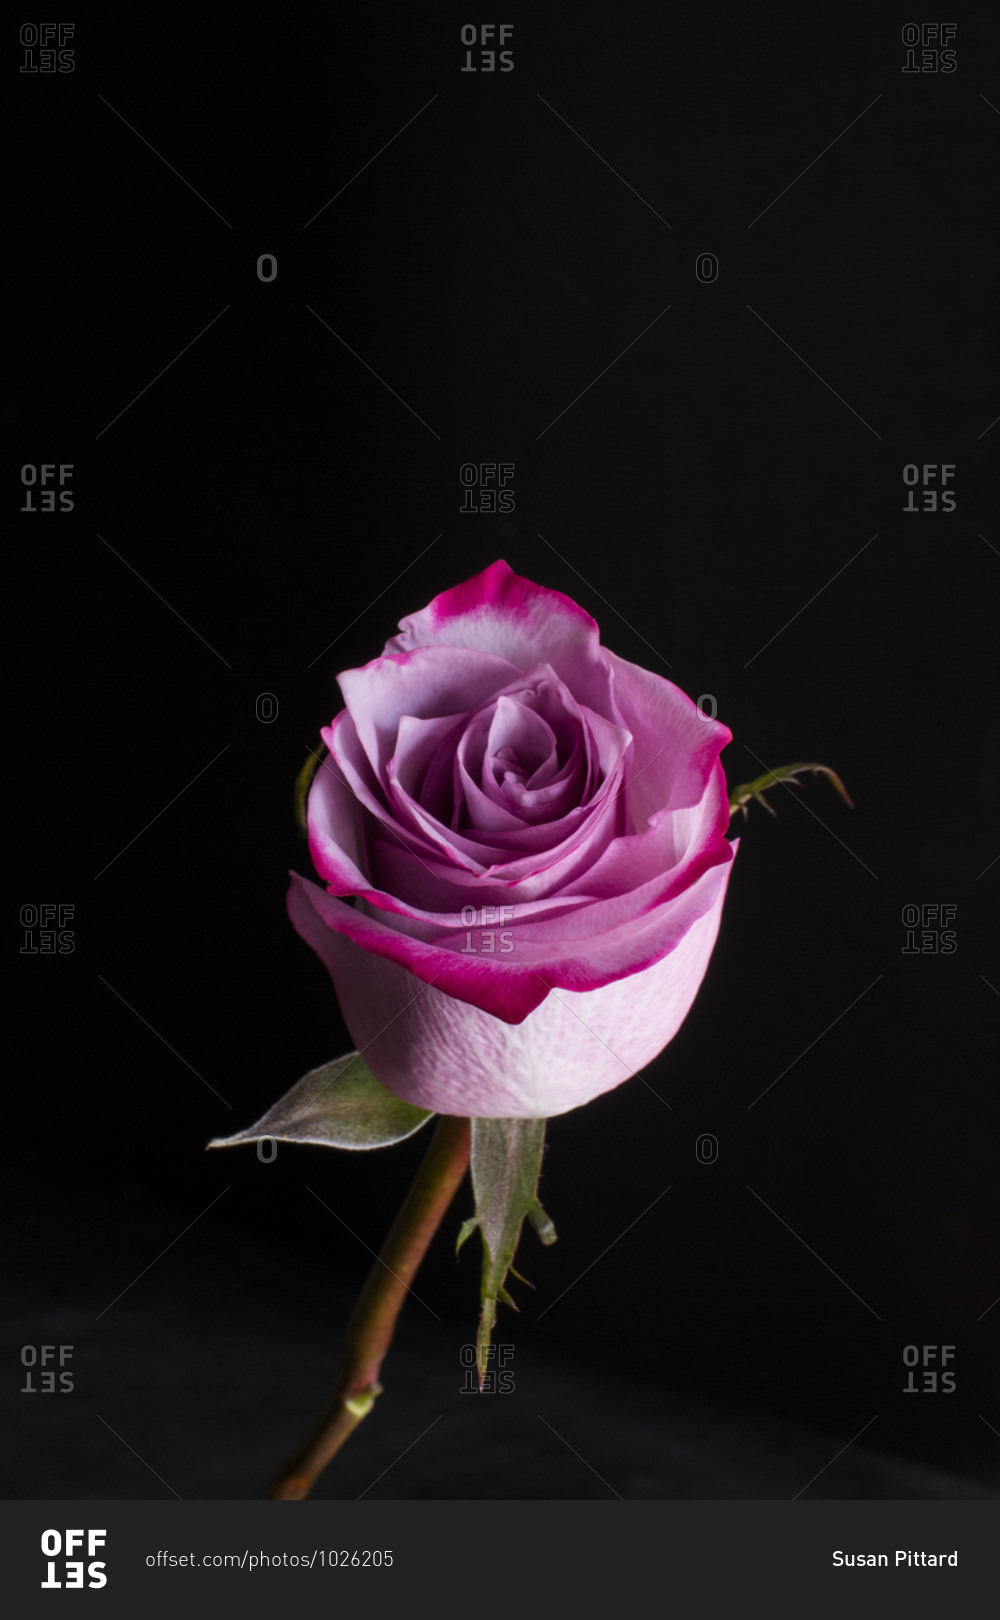 A single pink rose in front of black background